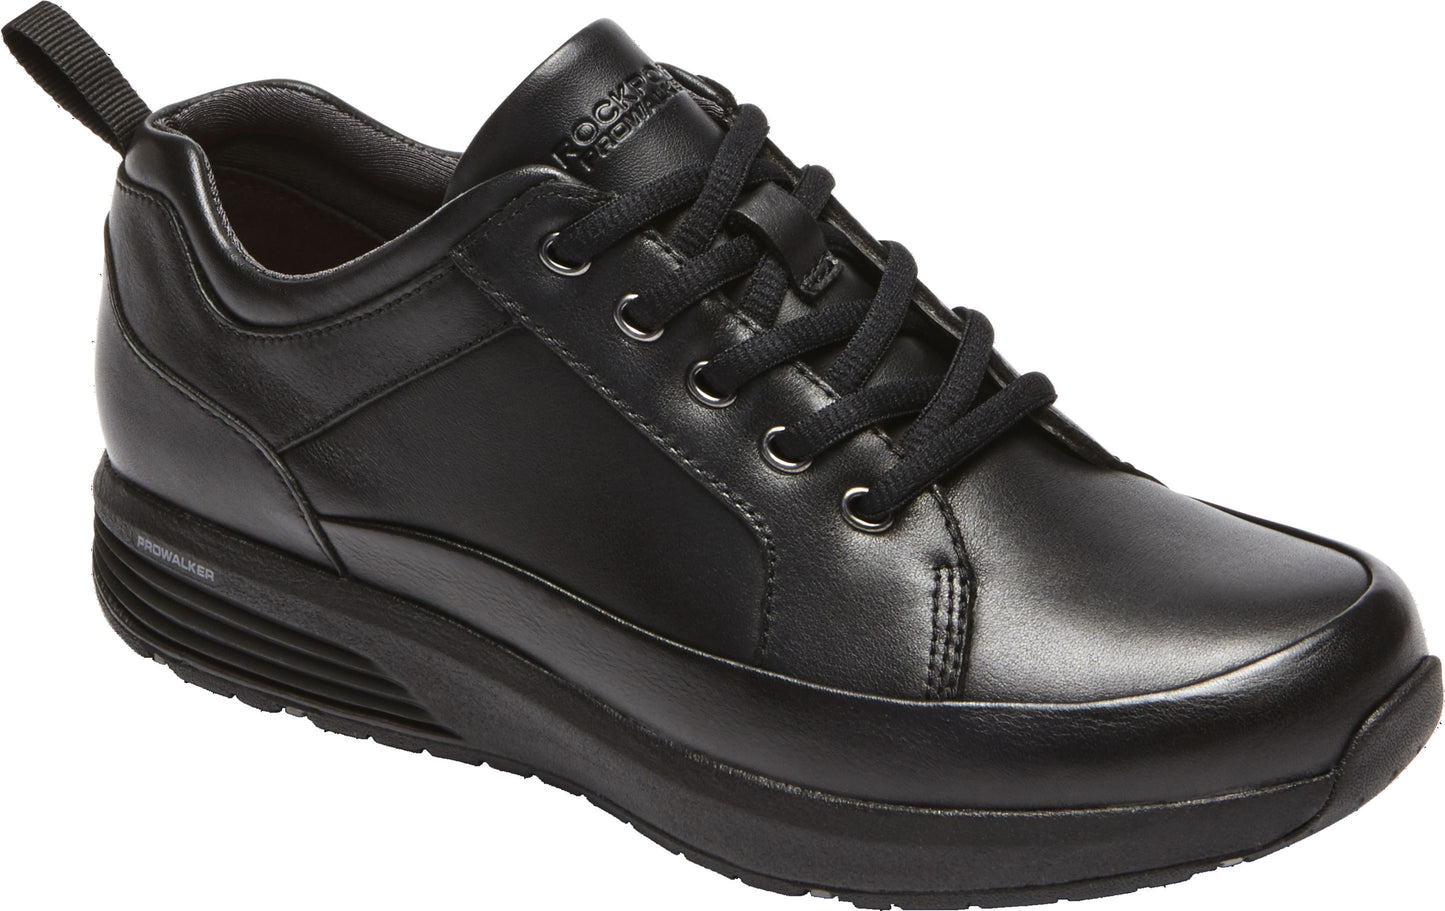 Rockport Shoes Trustride Wp Lace To Toe Black - Extra Wide